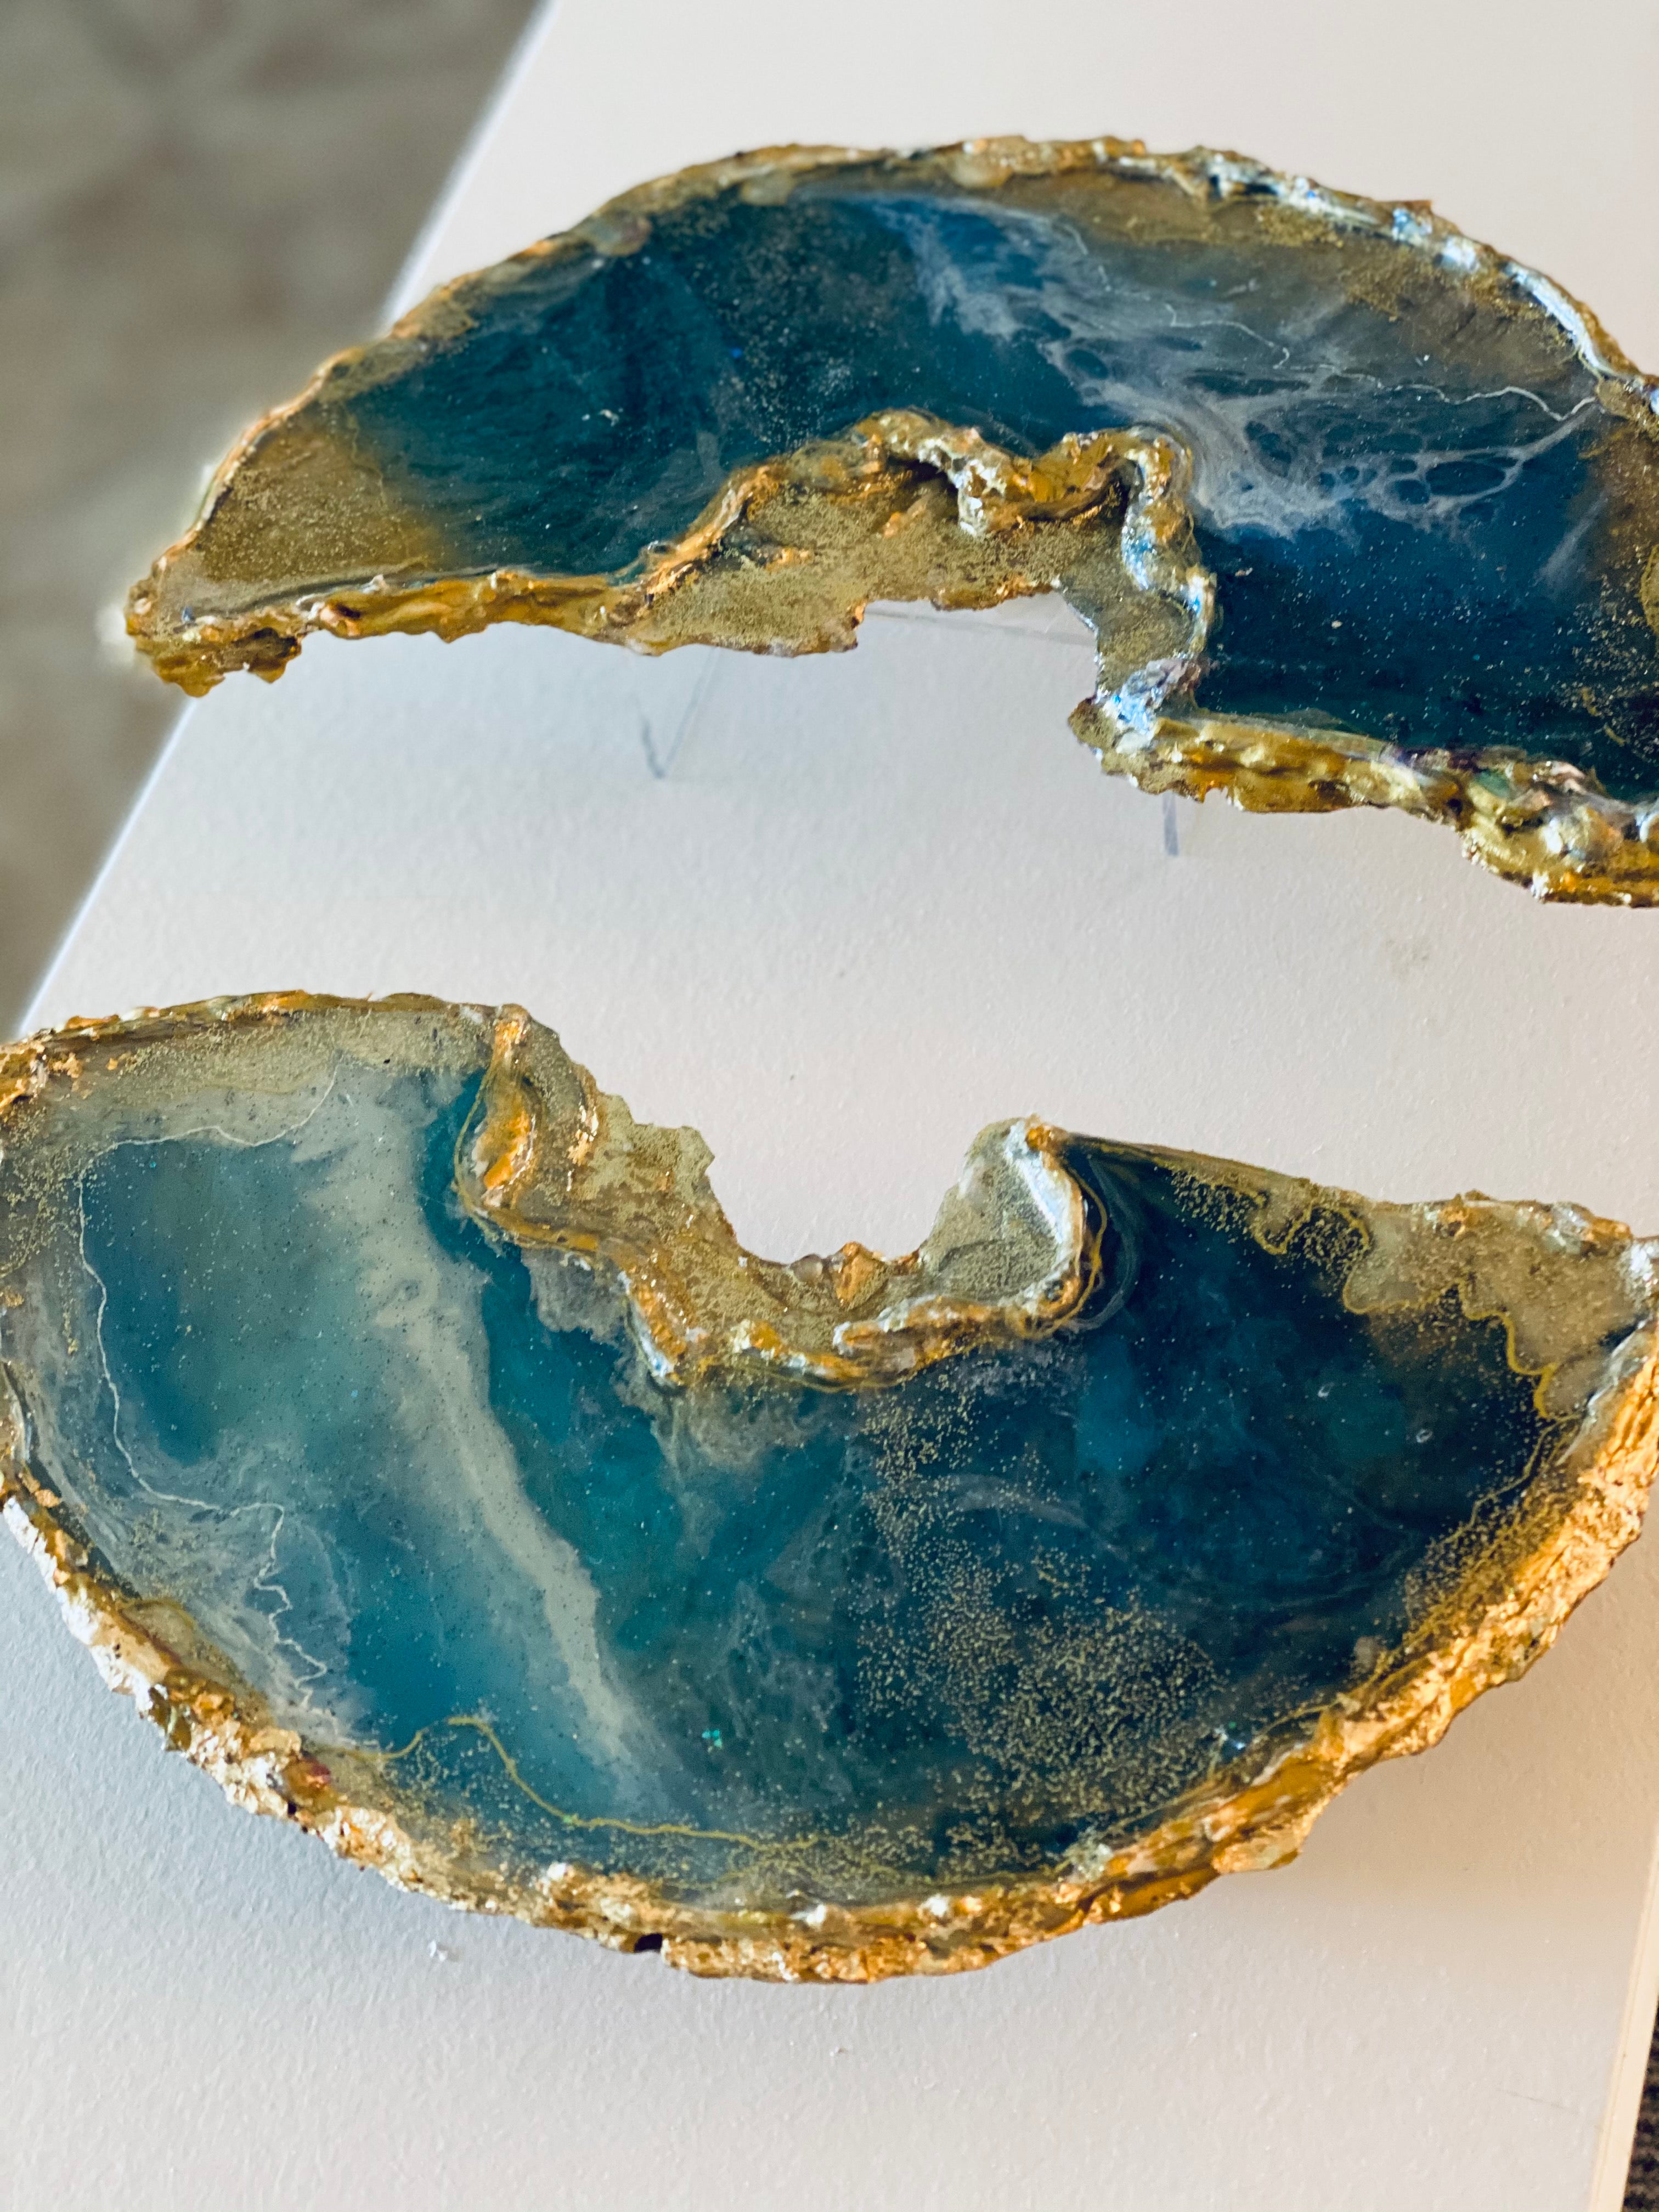 Agate from the sea